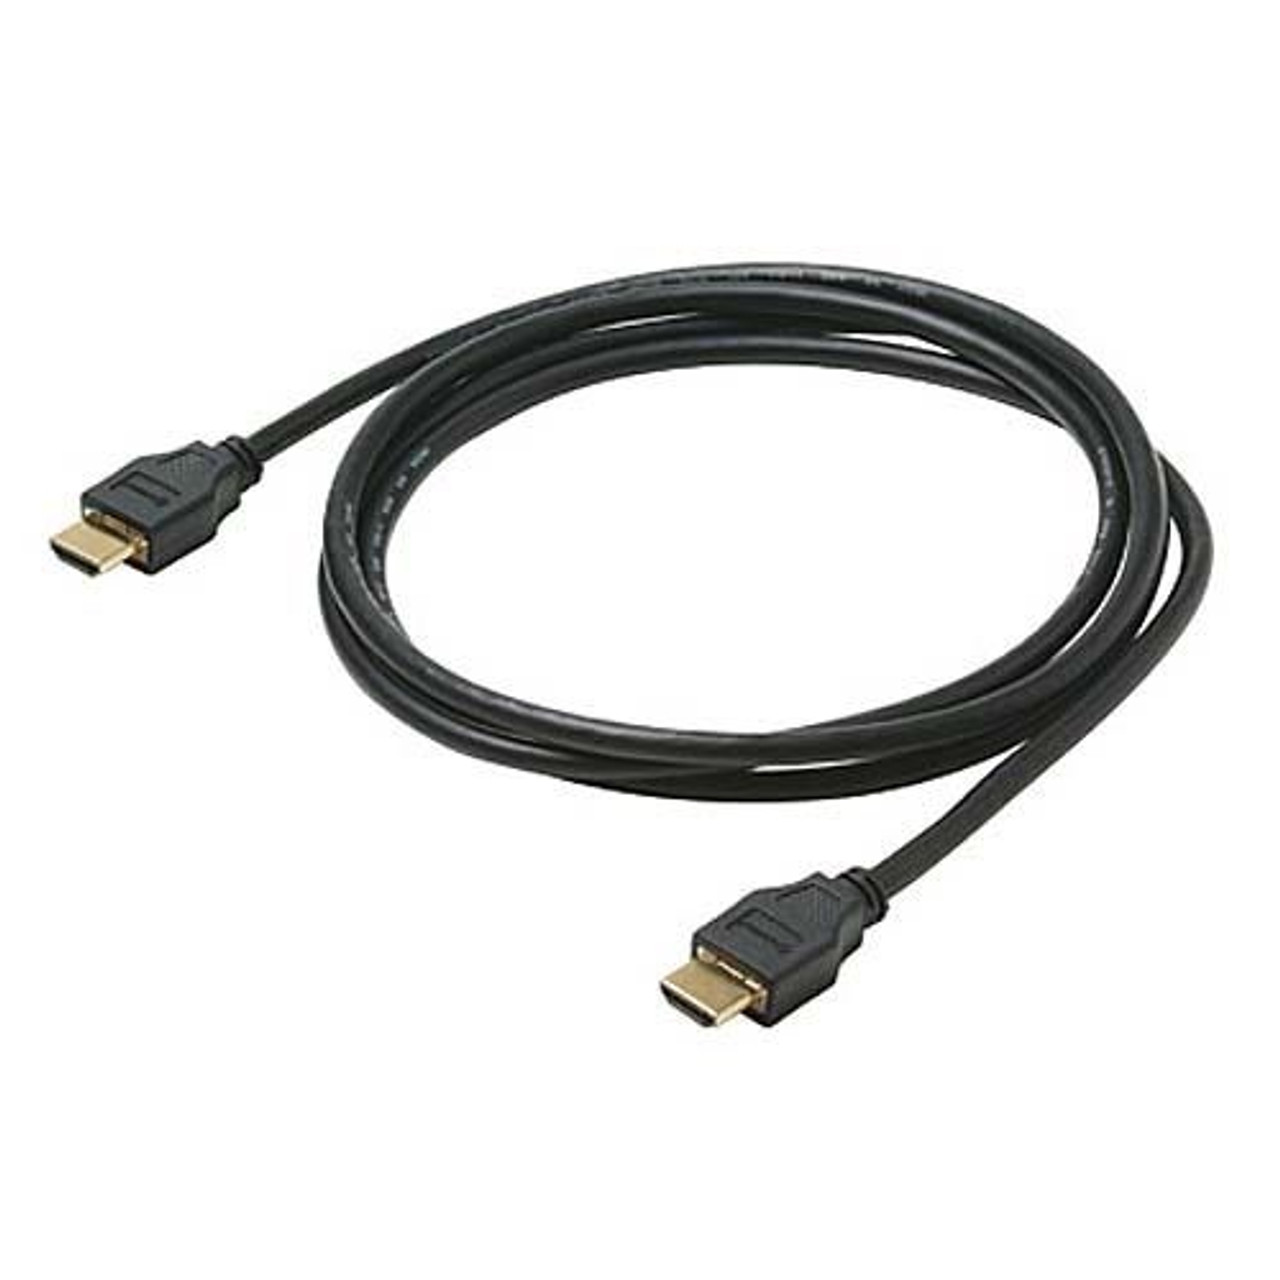 Eagle 12' FT HDMI Cable 1.4 Male to Male Ethernet High Speed 3D Approved 4096x2160 10.2 Gbps HDTV Digital Video Resolution Male to Male High Definition Multi-Media Interface Interconnect with Gold Contacts